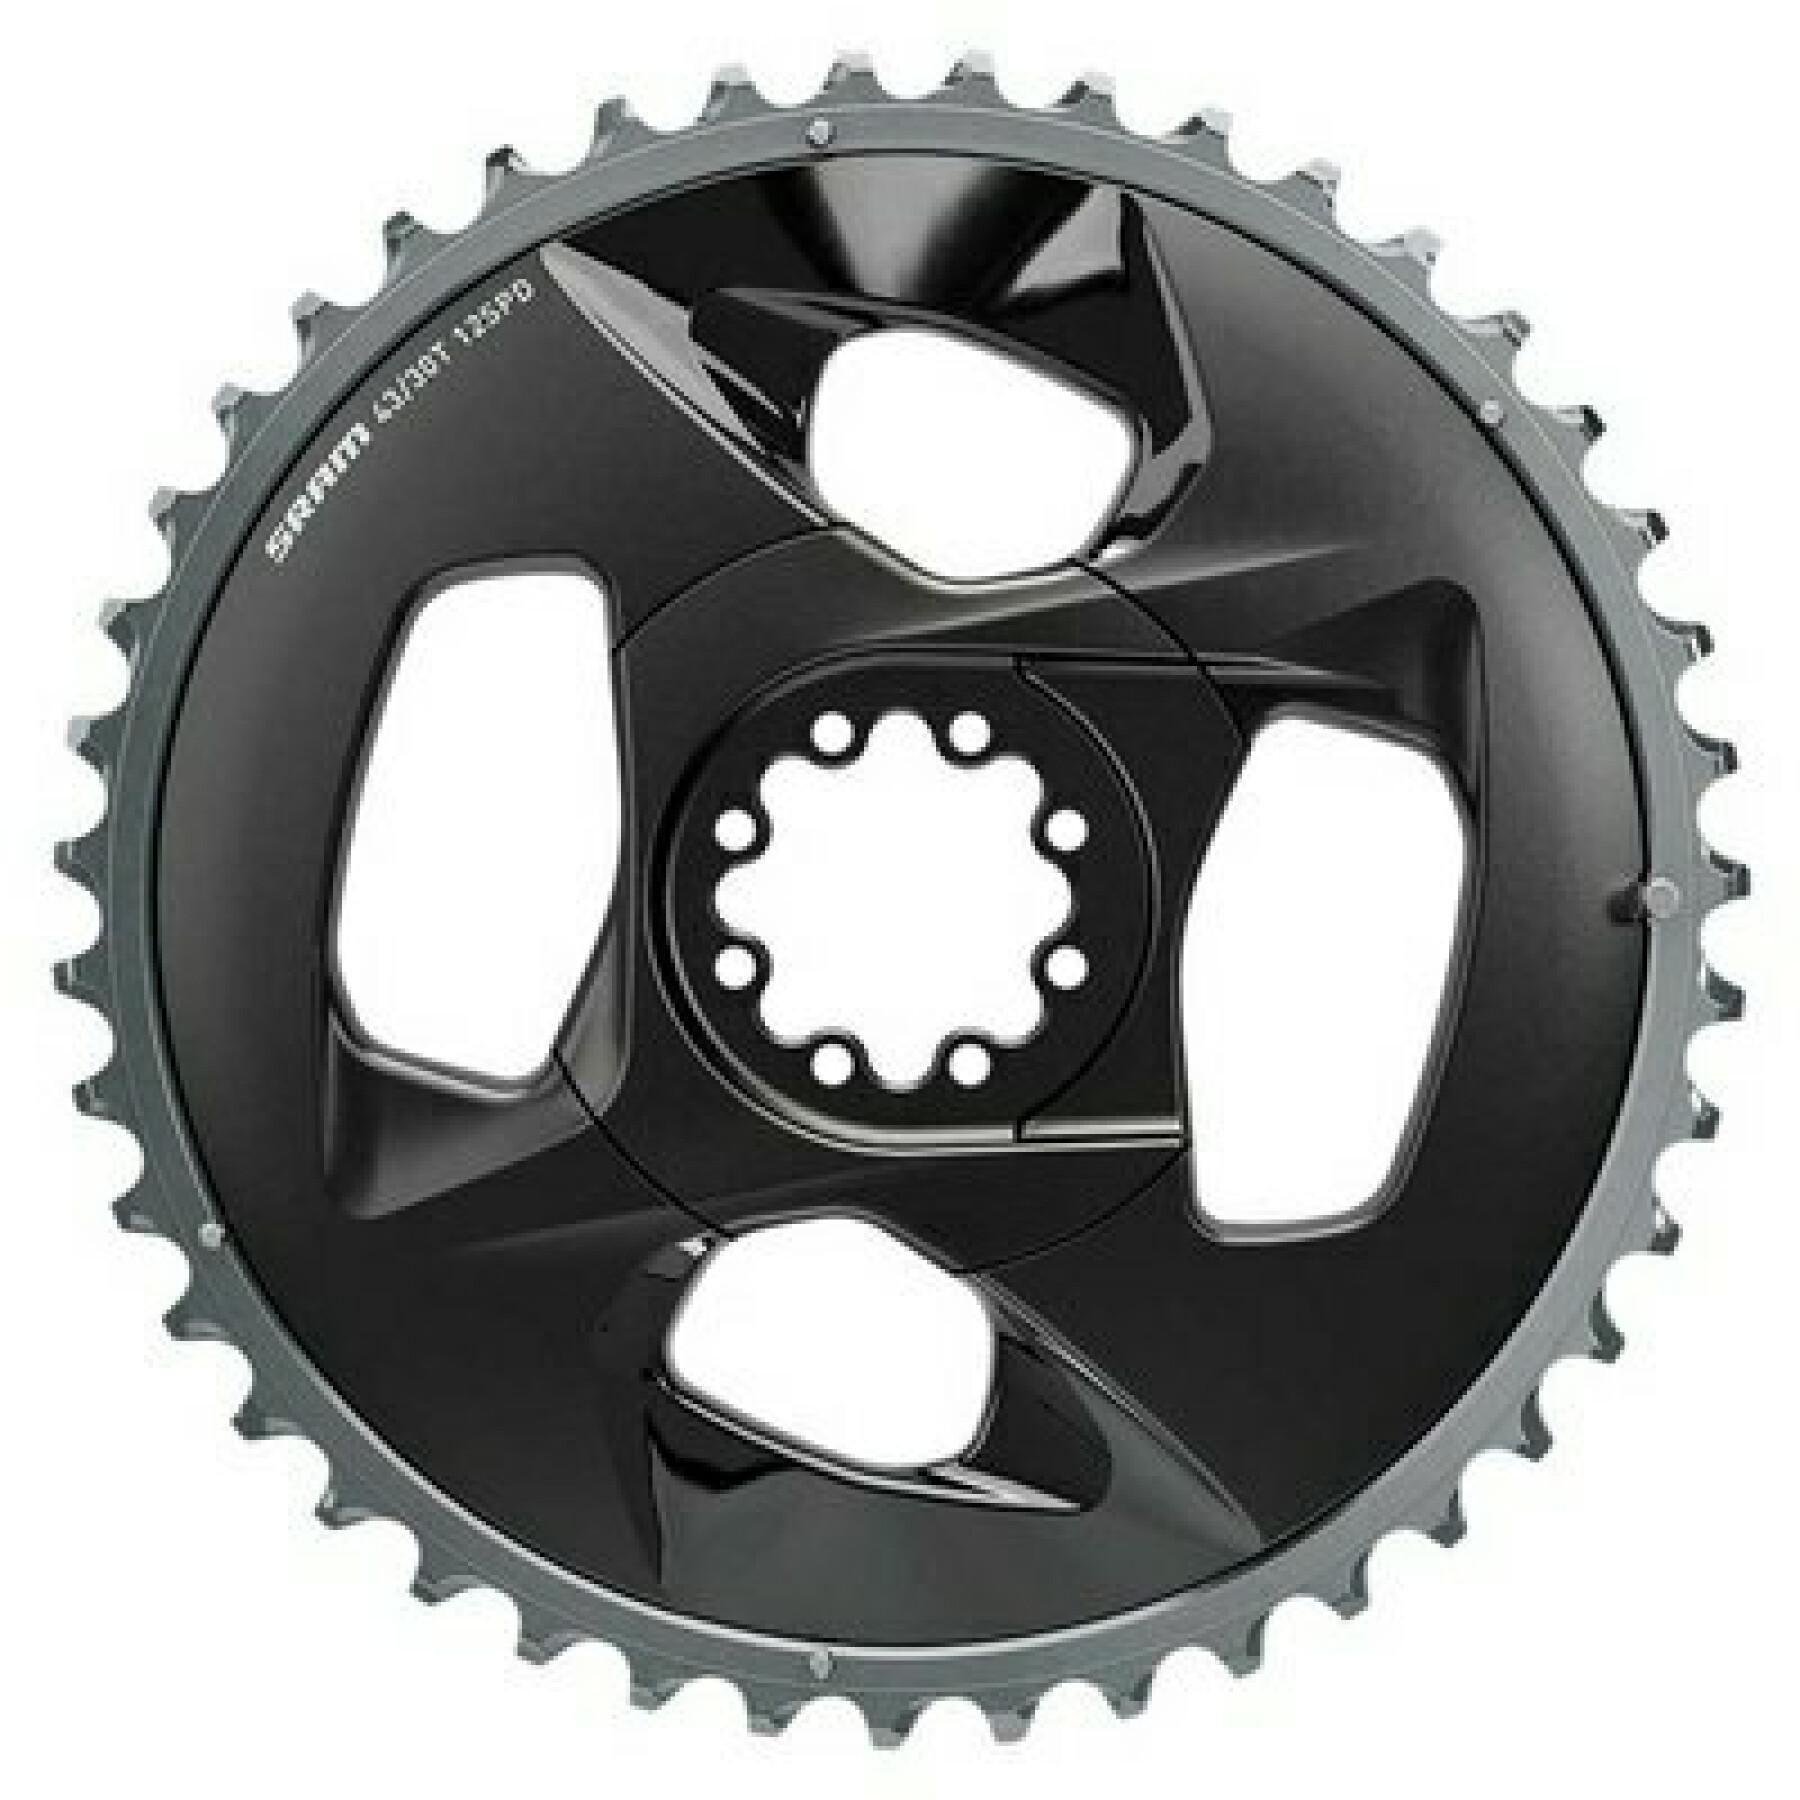 Tray Sram Force Wide 43d 94bcd 2x12